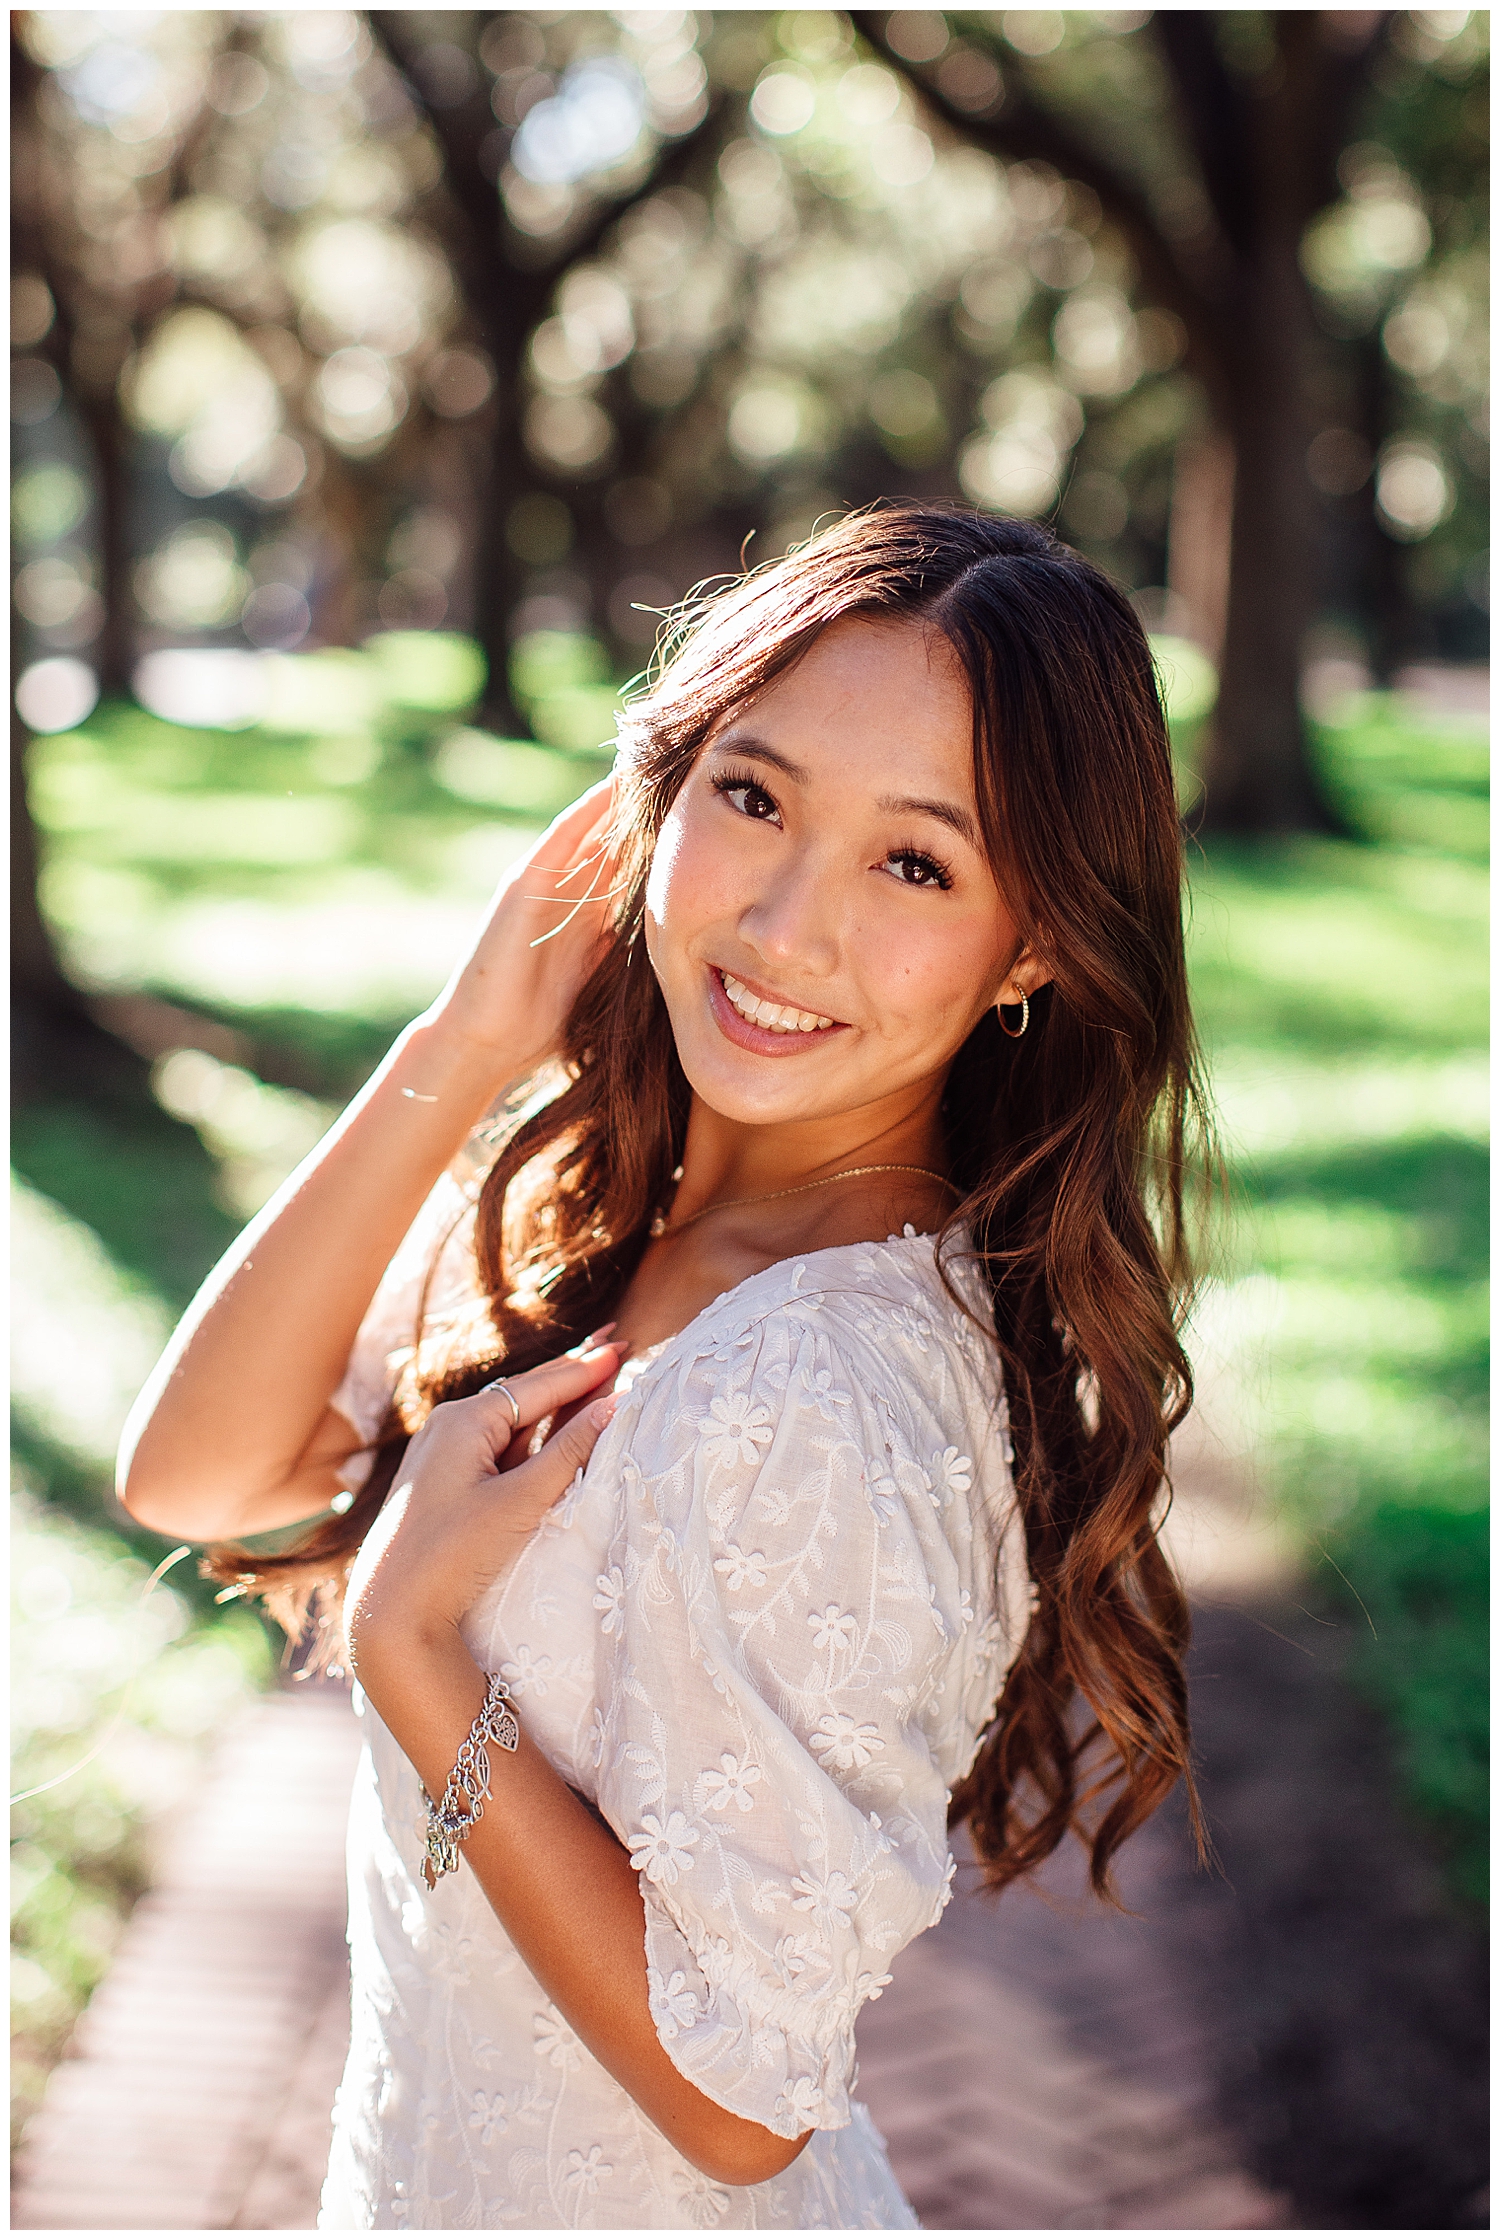 high school senior girl smiling with hand in hair in white sundress standing between trees